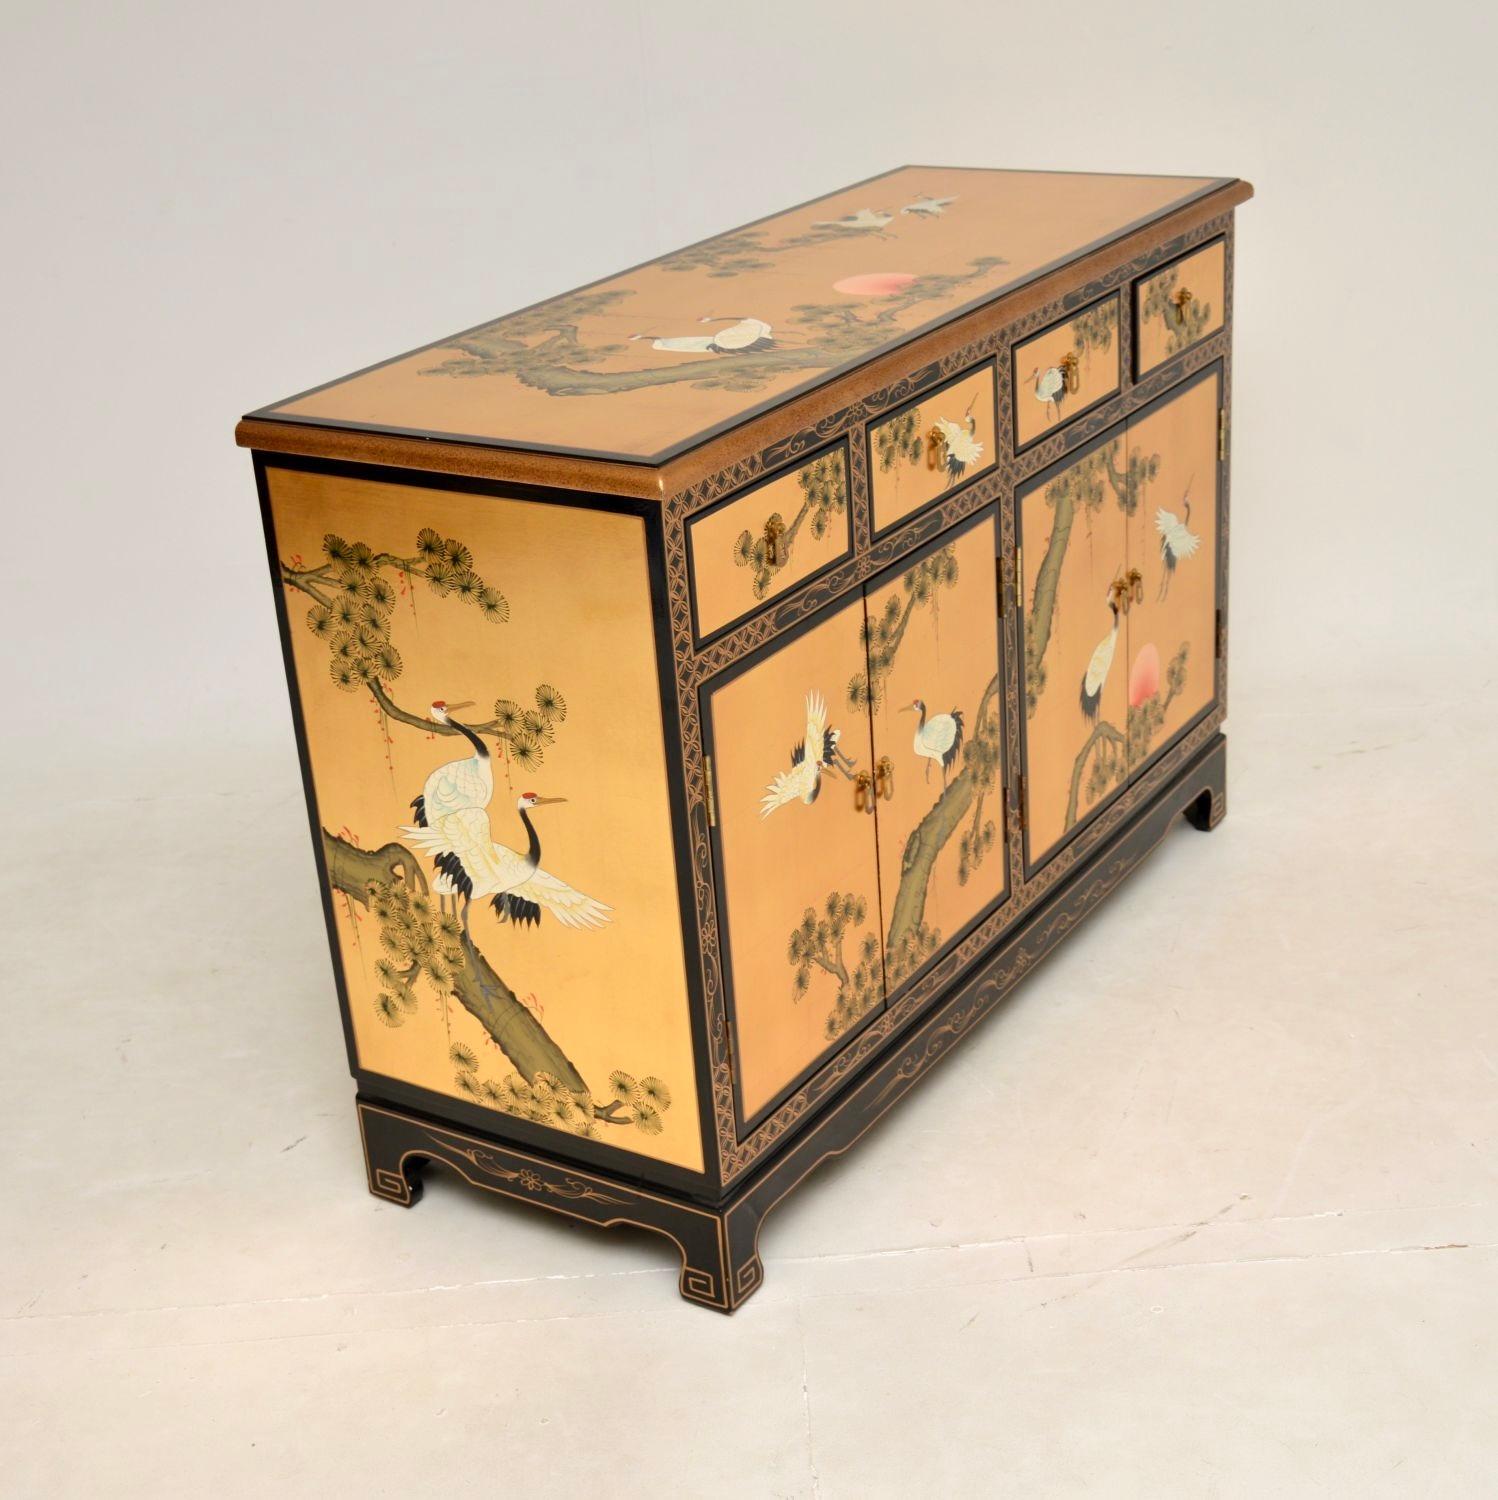 A beautiful antique Chinese style lacquered chinoiserie sideboard. This was likely made in England in around the 1970’s.

We obtained it privately from a stunning property in Knightsbridge, it is of great quality and is beautifully designed. It has